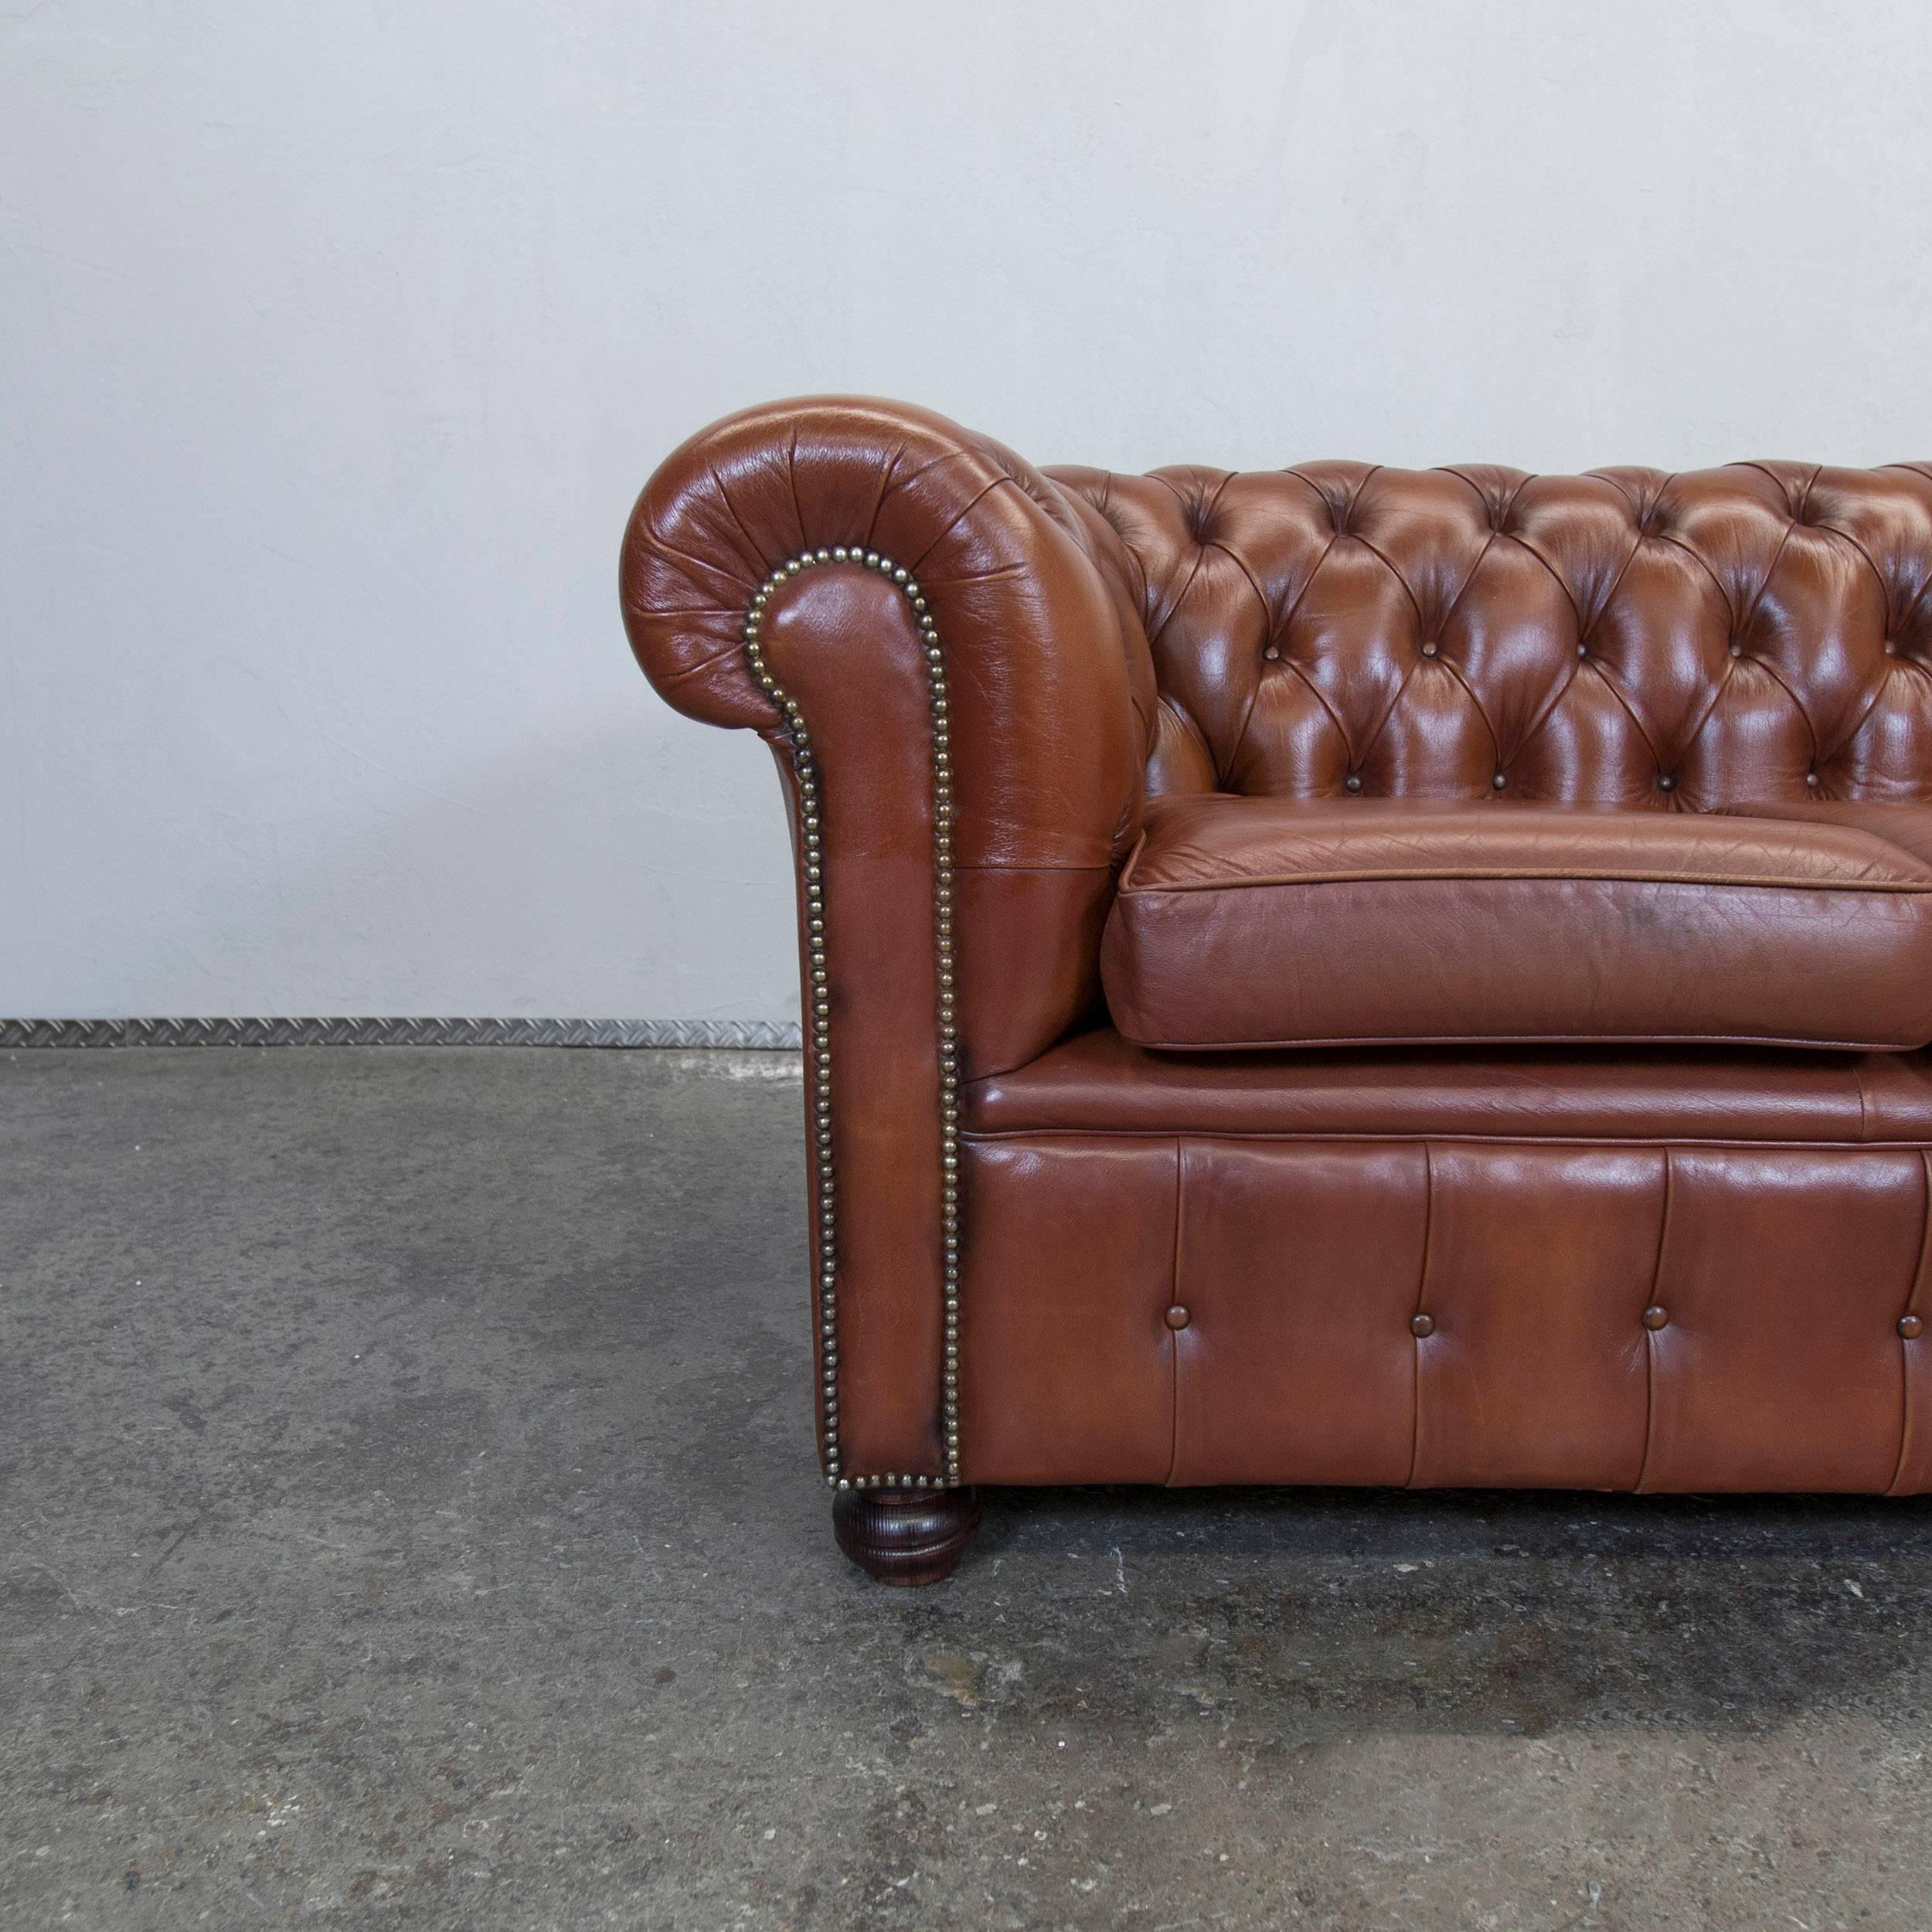 Brown colored Chesterfield leather sofa in a vintage style, designed for pure comfort and elegance.